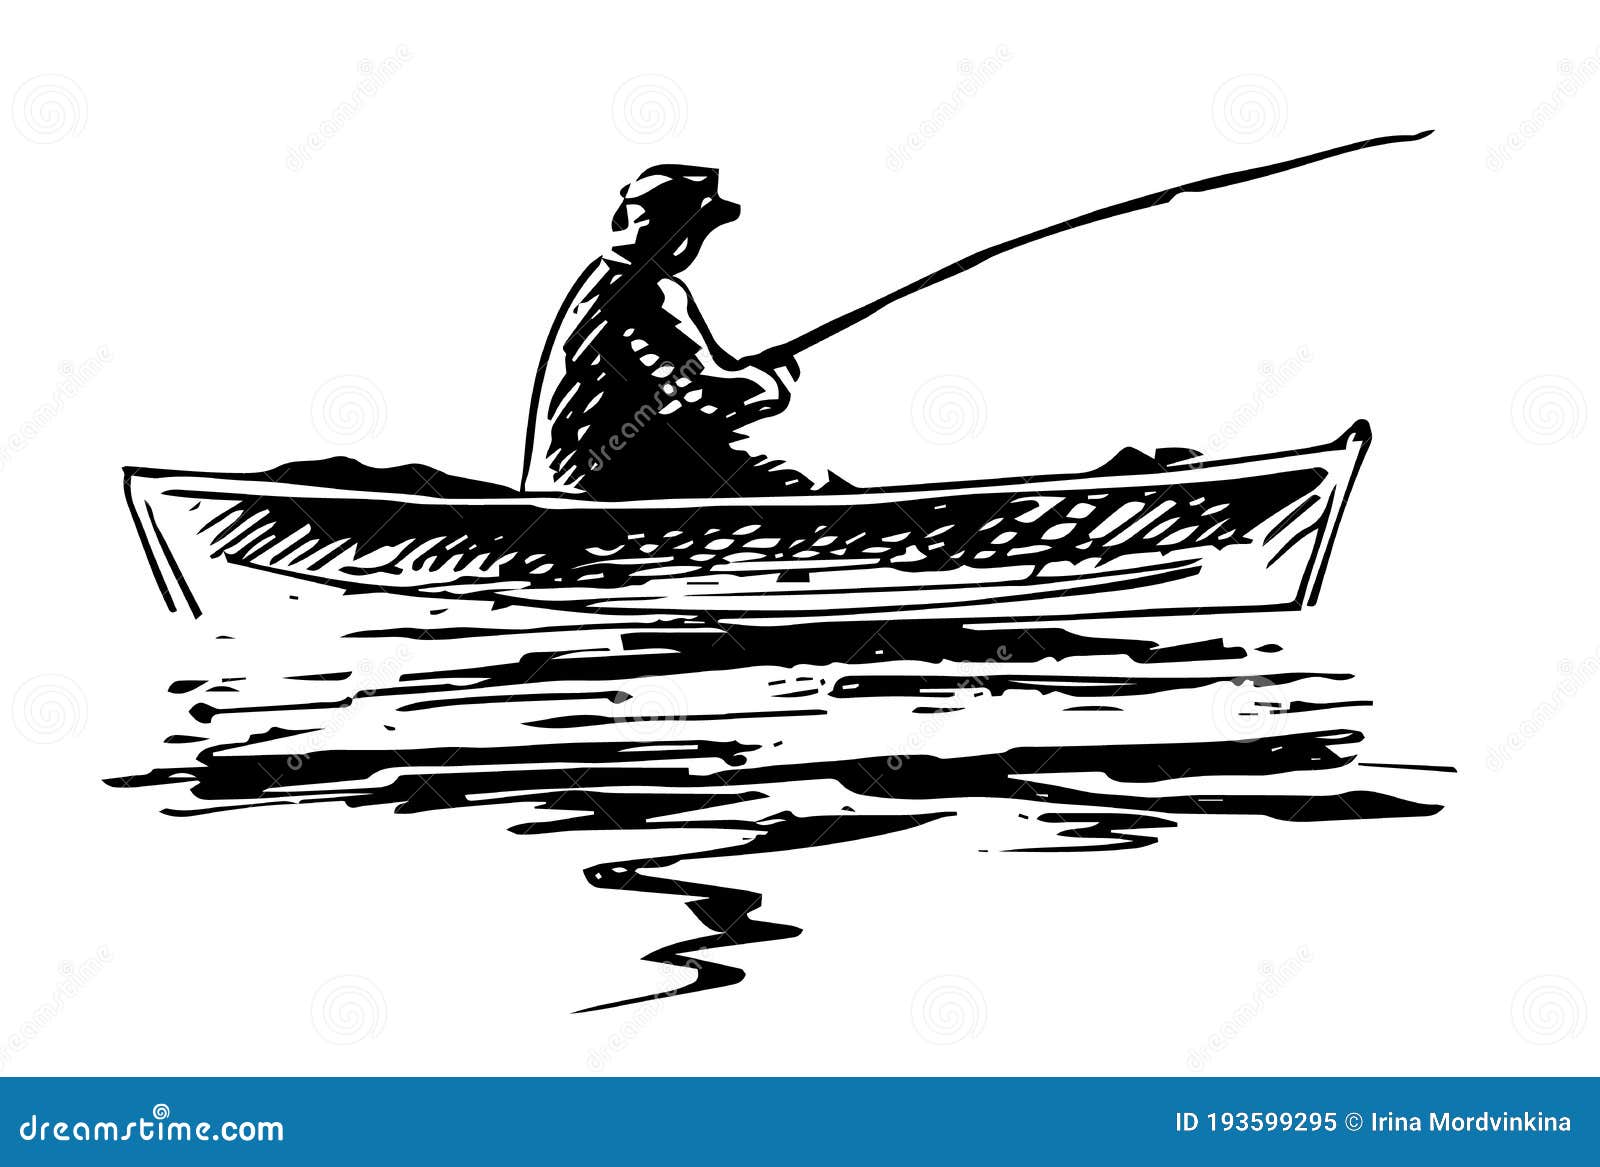 Fish Fisherman Sketch Vector Images over 1200